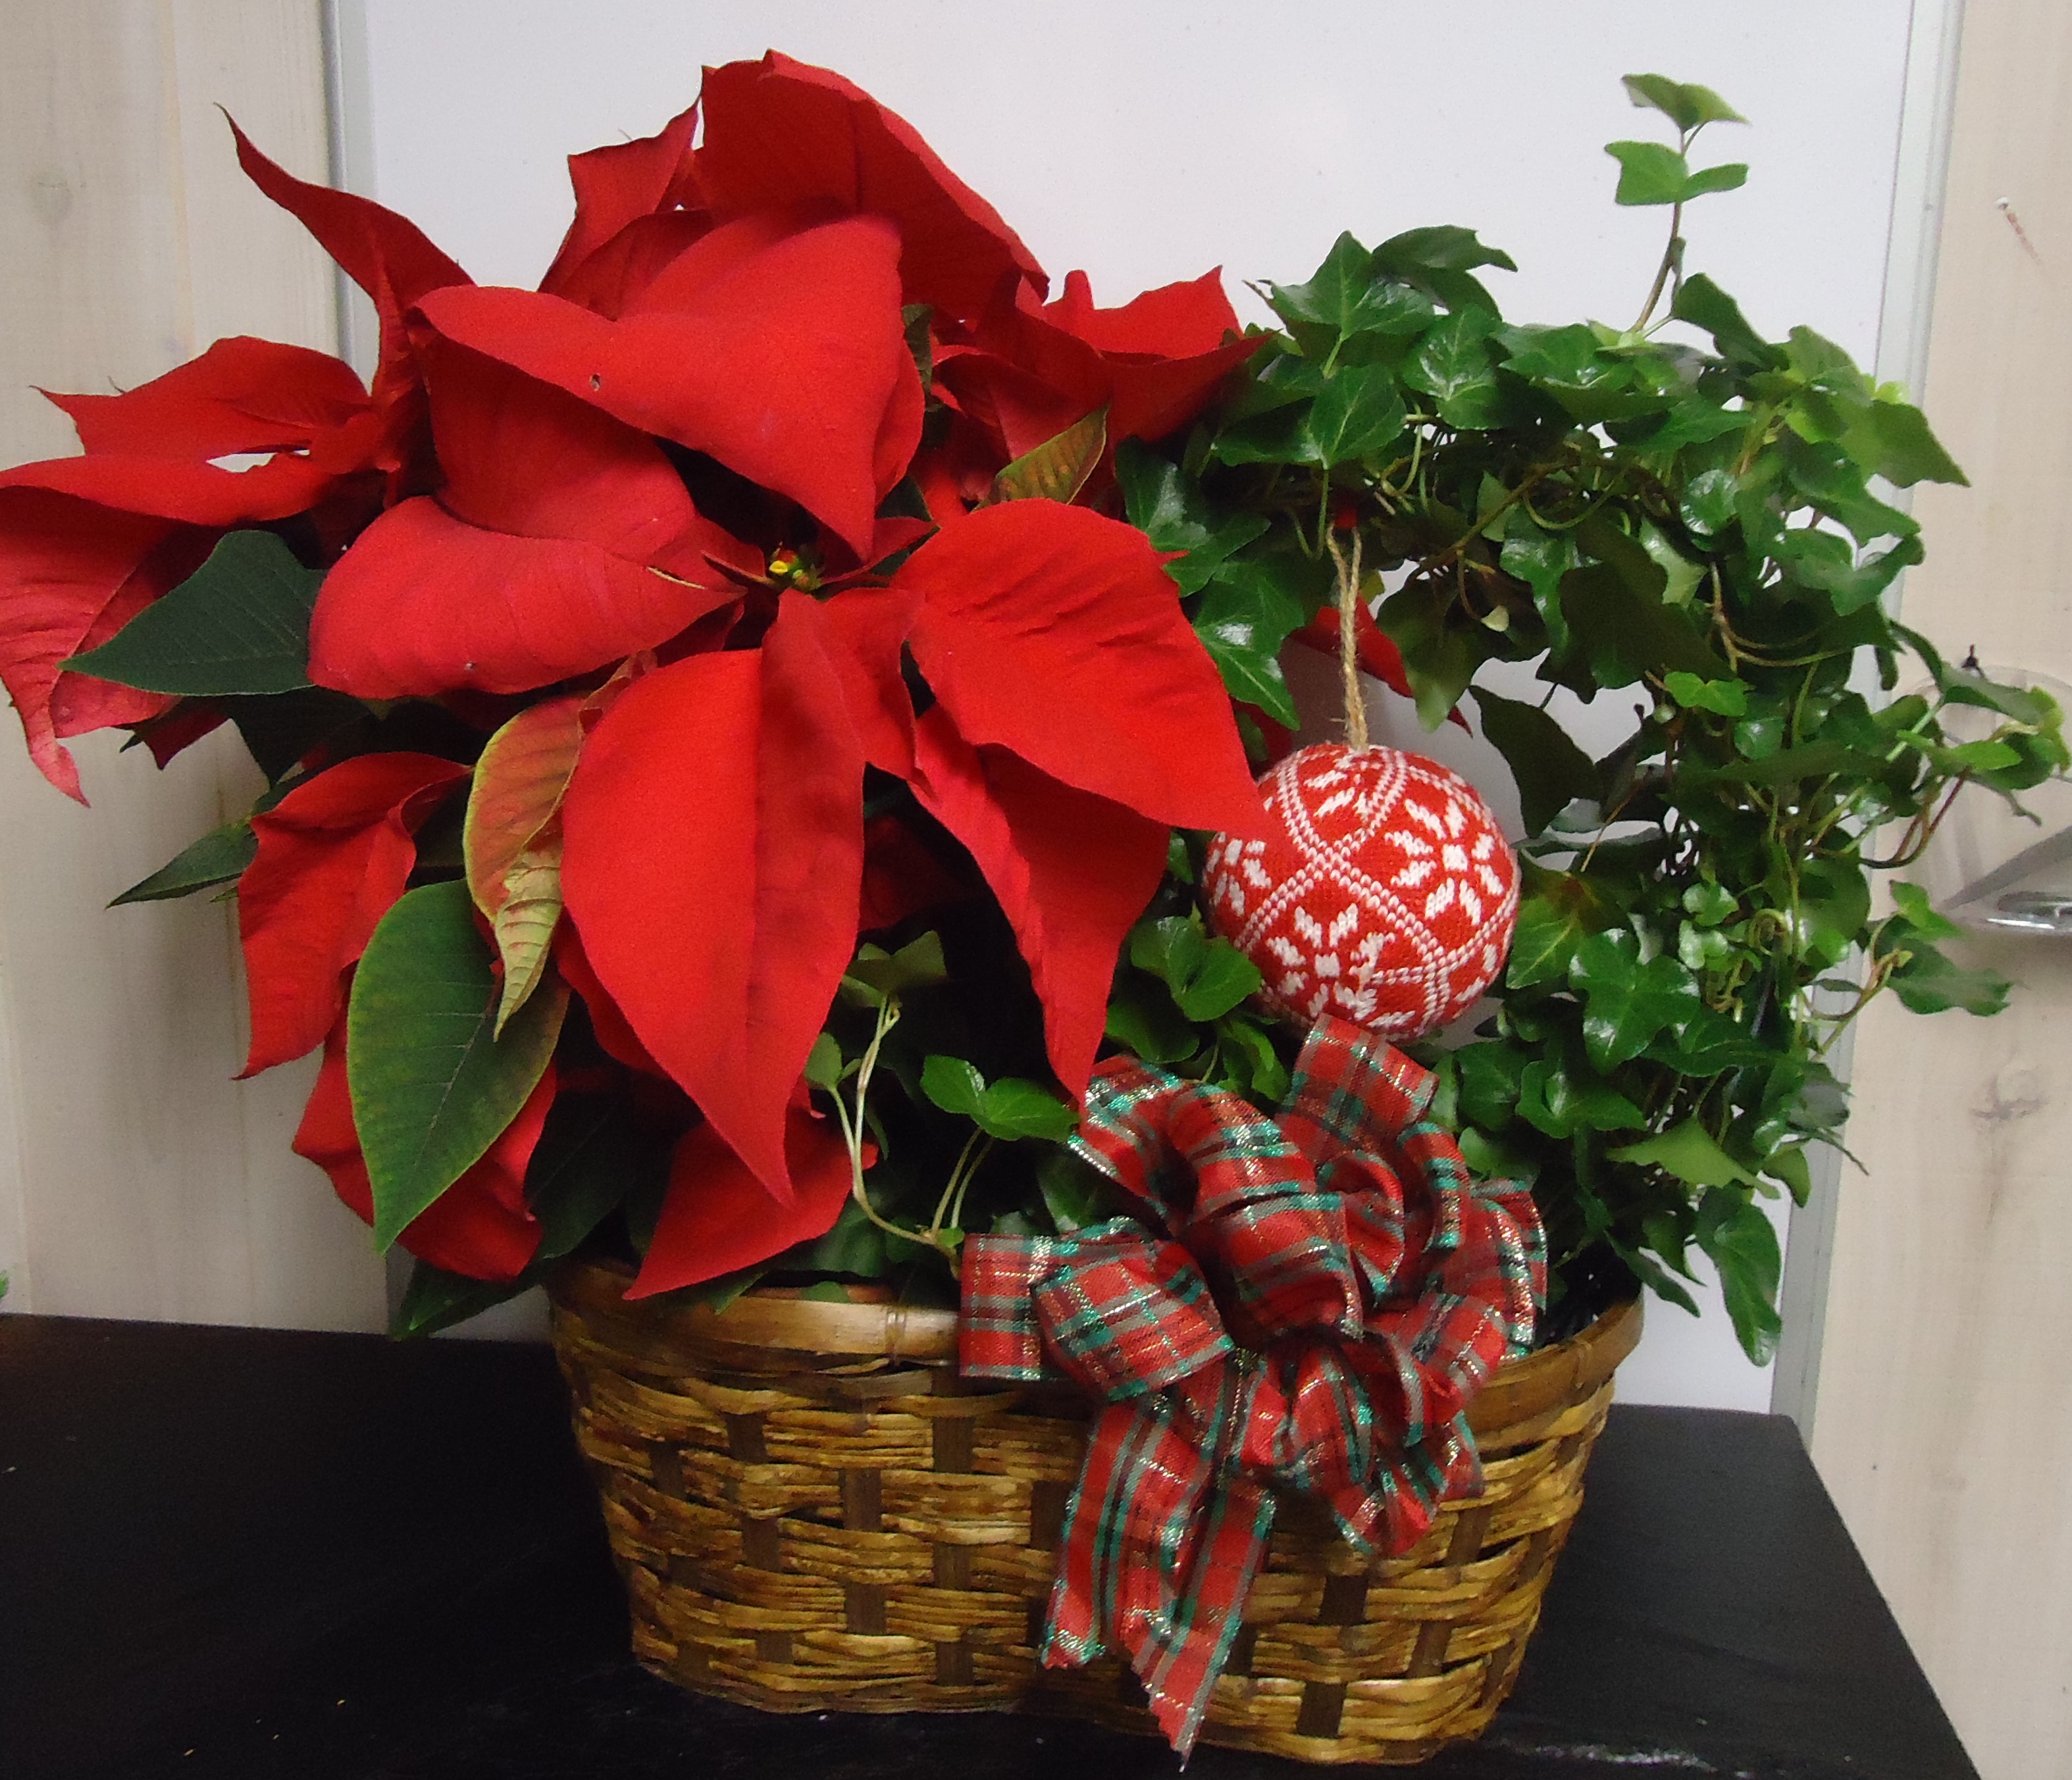 (5) "Double" Basket
(Red Poinsettia & Ivy Hoop
W/ Christmas Ball Ornament)
$70.00